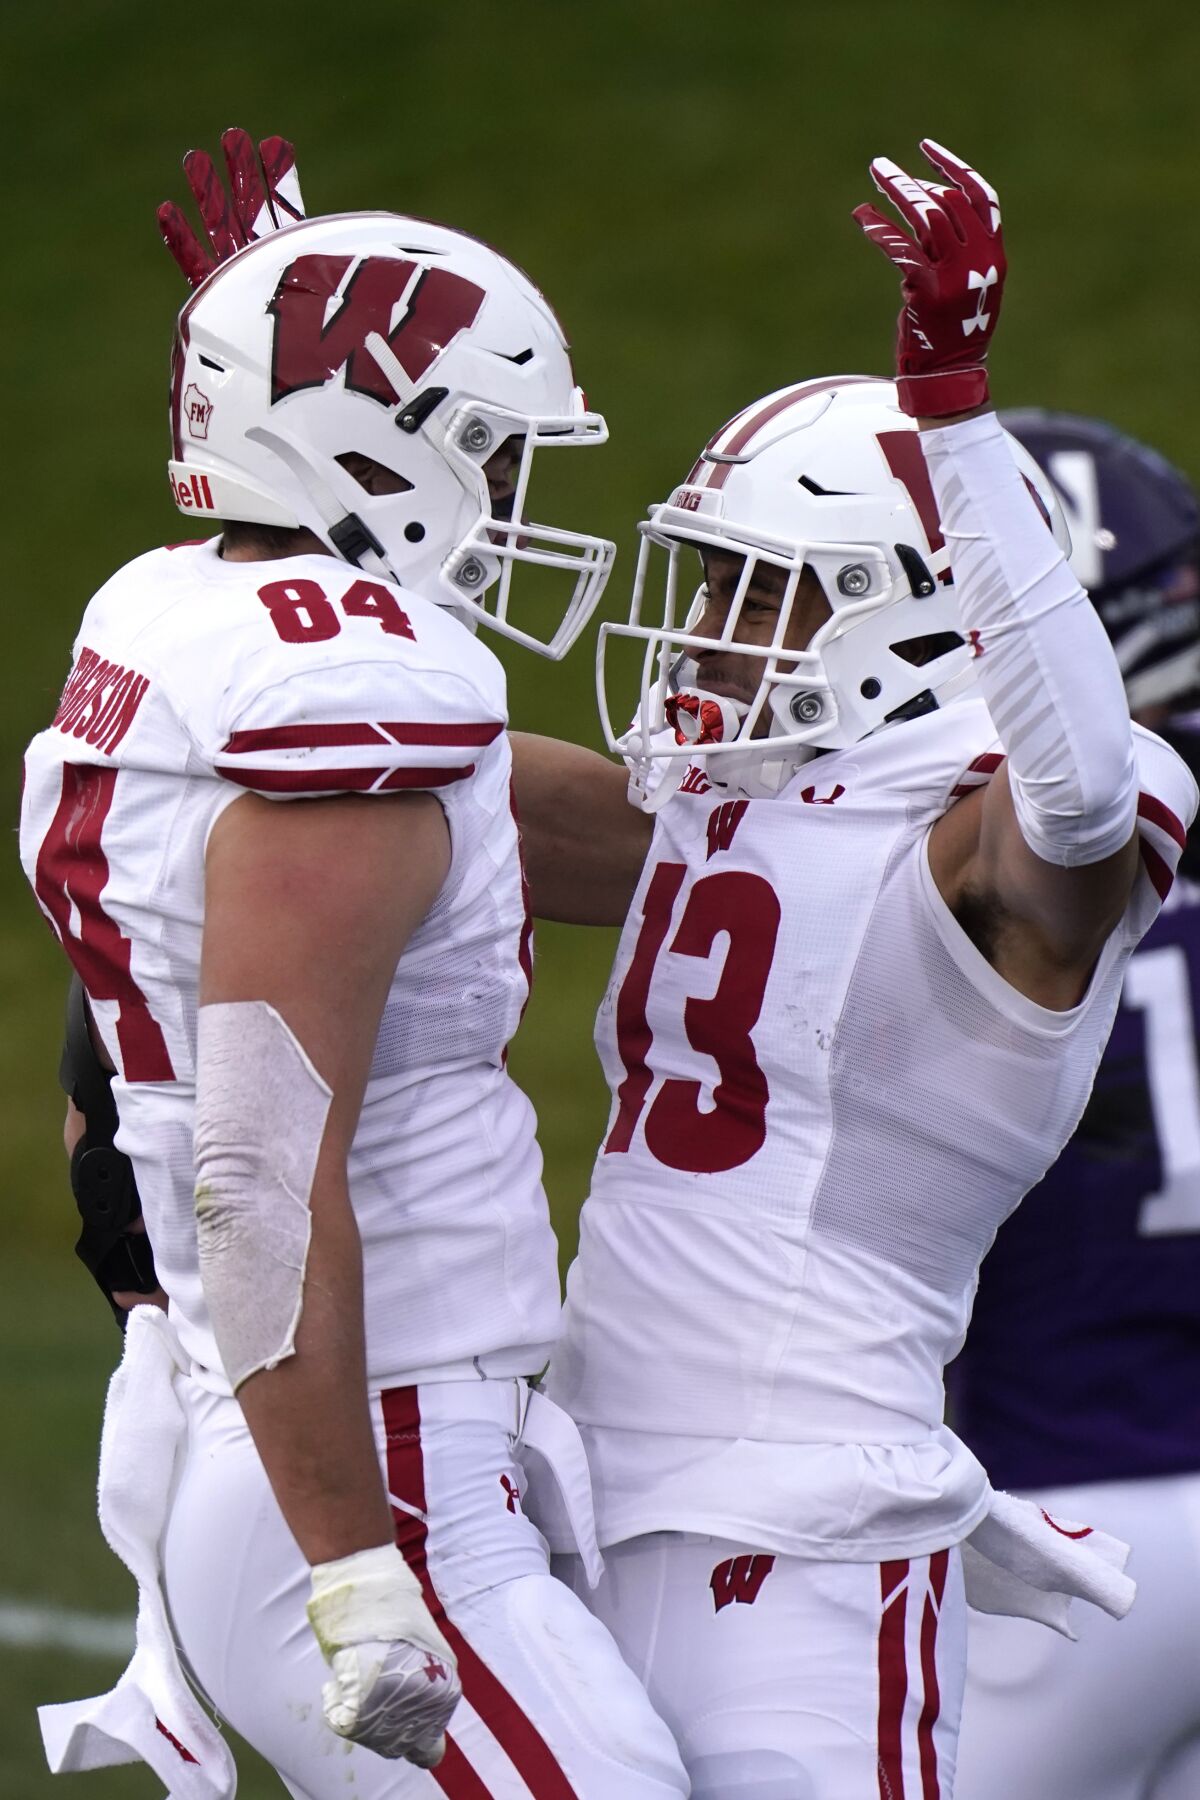 Wisconsin wide receiver Chimere Dike, right, celebrates with tight end Jake Ferguson after scoring touchdown during the first half of an NCAA college football game against Northwestern in Evanston, Ill., Saturday, Nov. 21, 2020. (AP Photo/Nam Y. Huh)